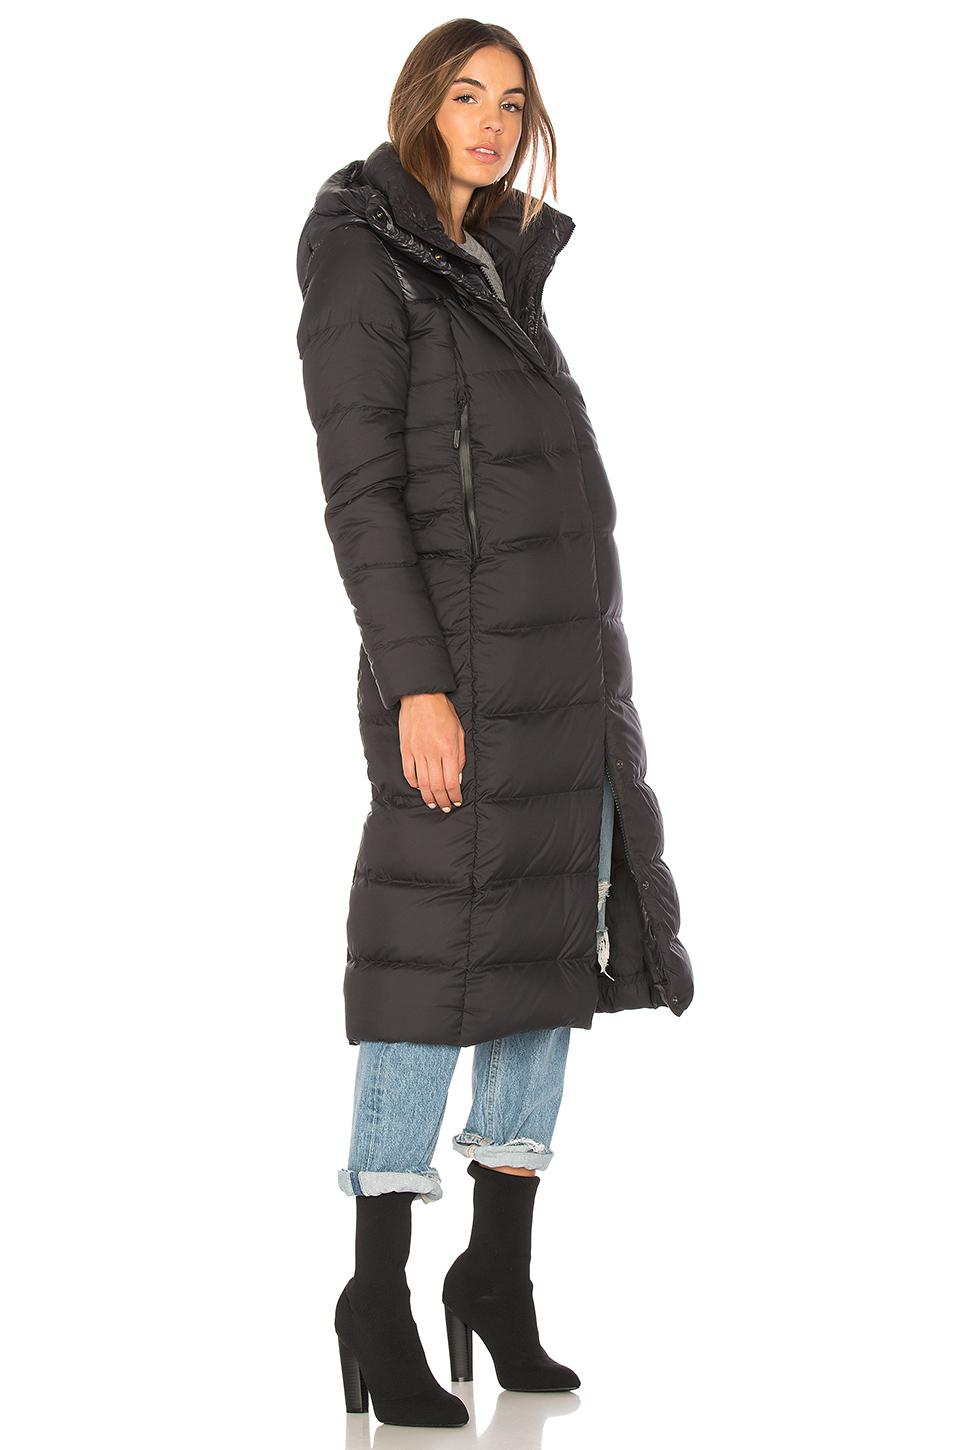 north face cryos down jacket Shop Clothing & Shoes Online